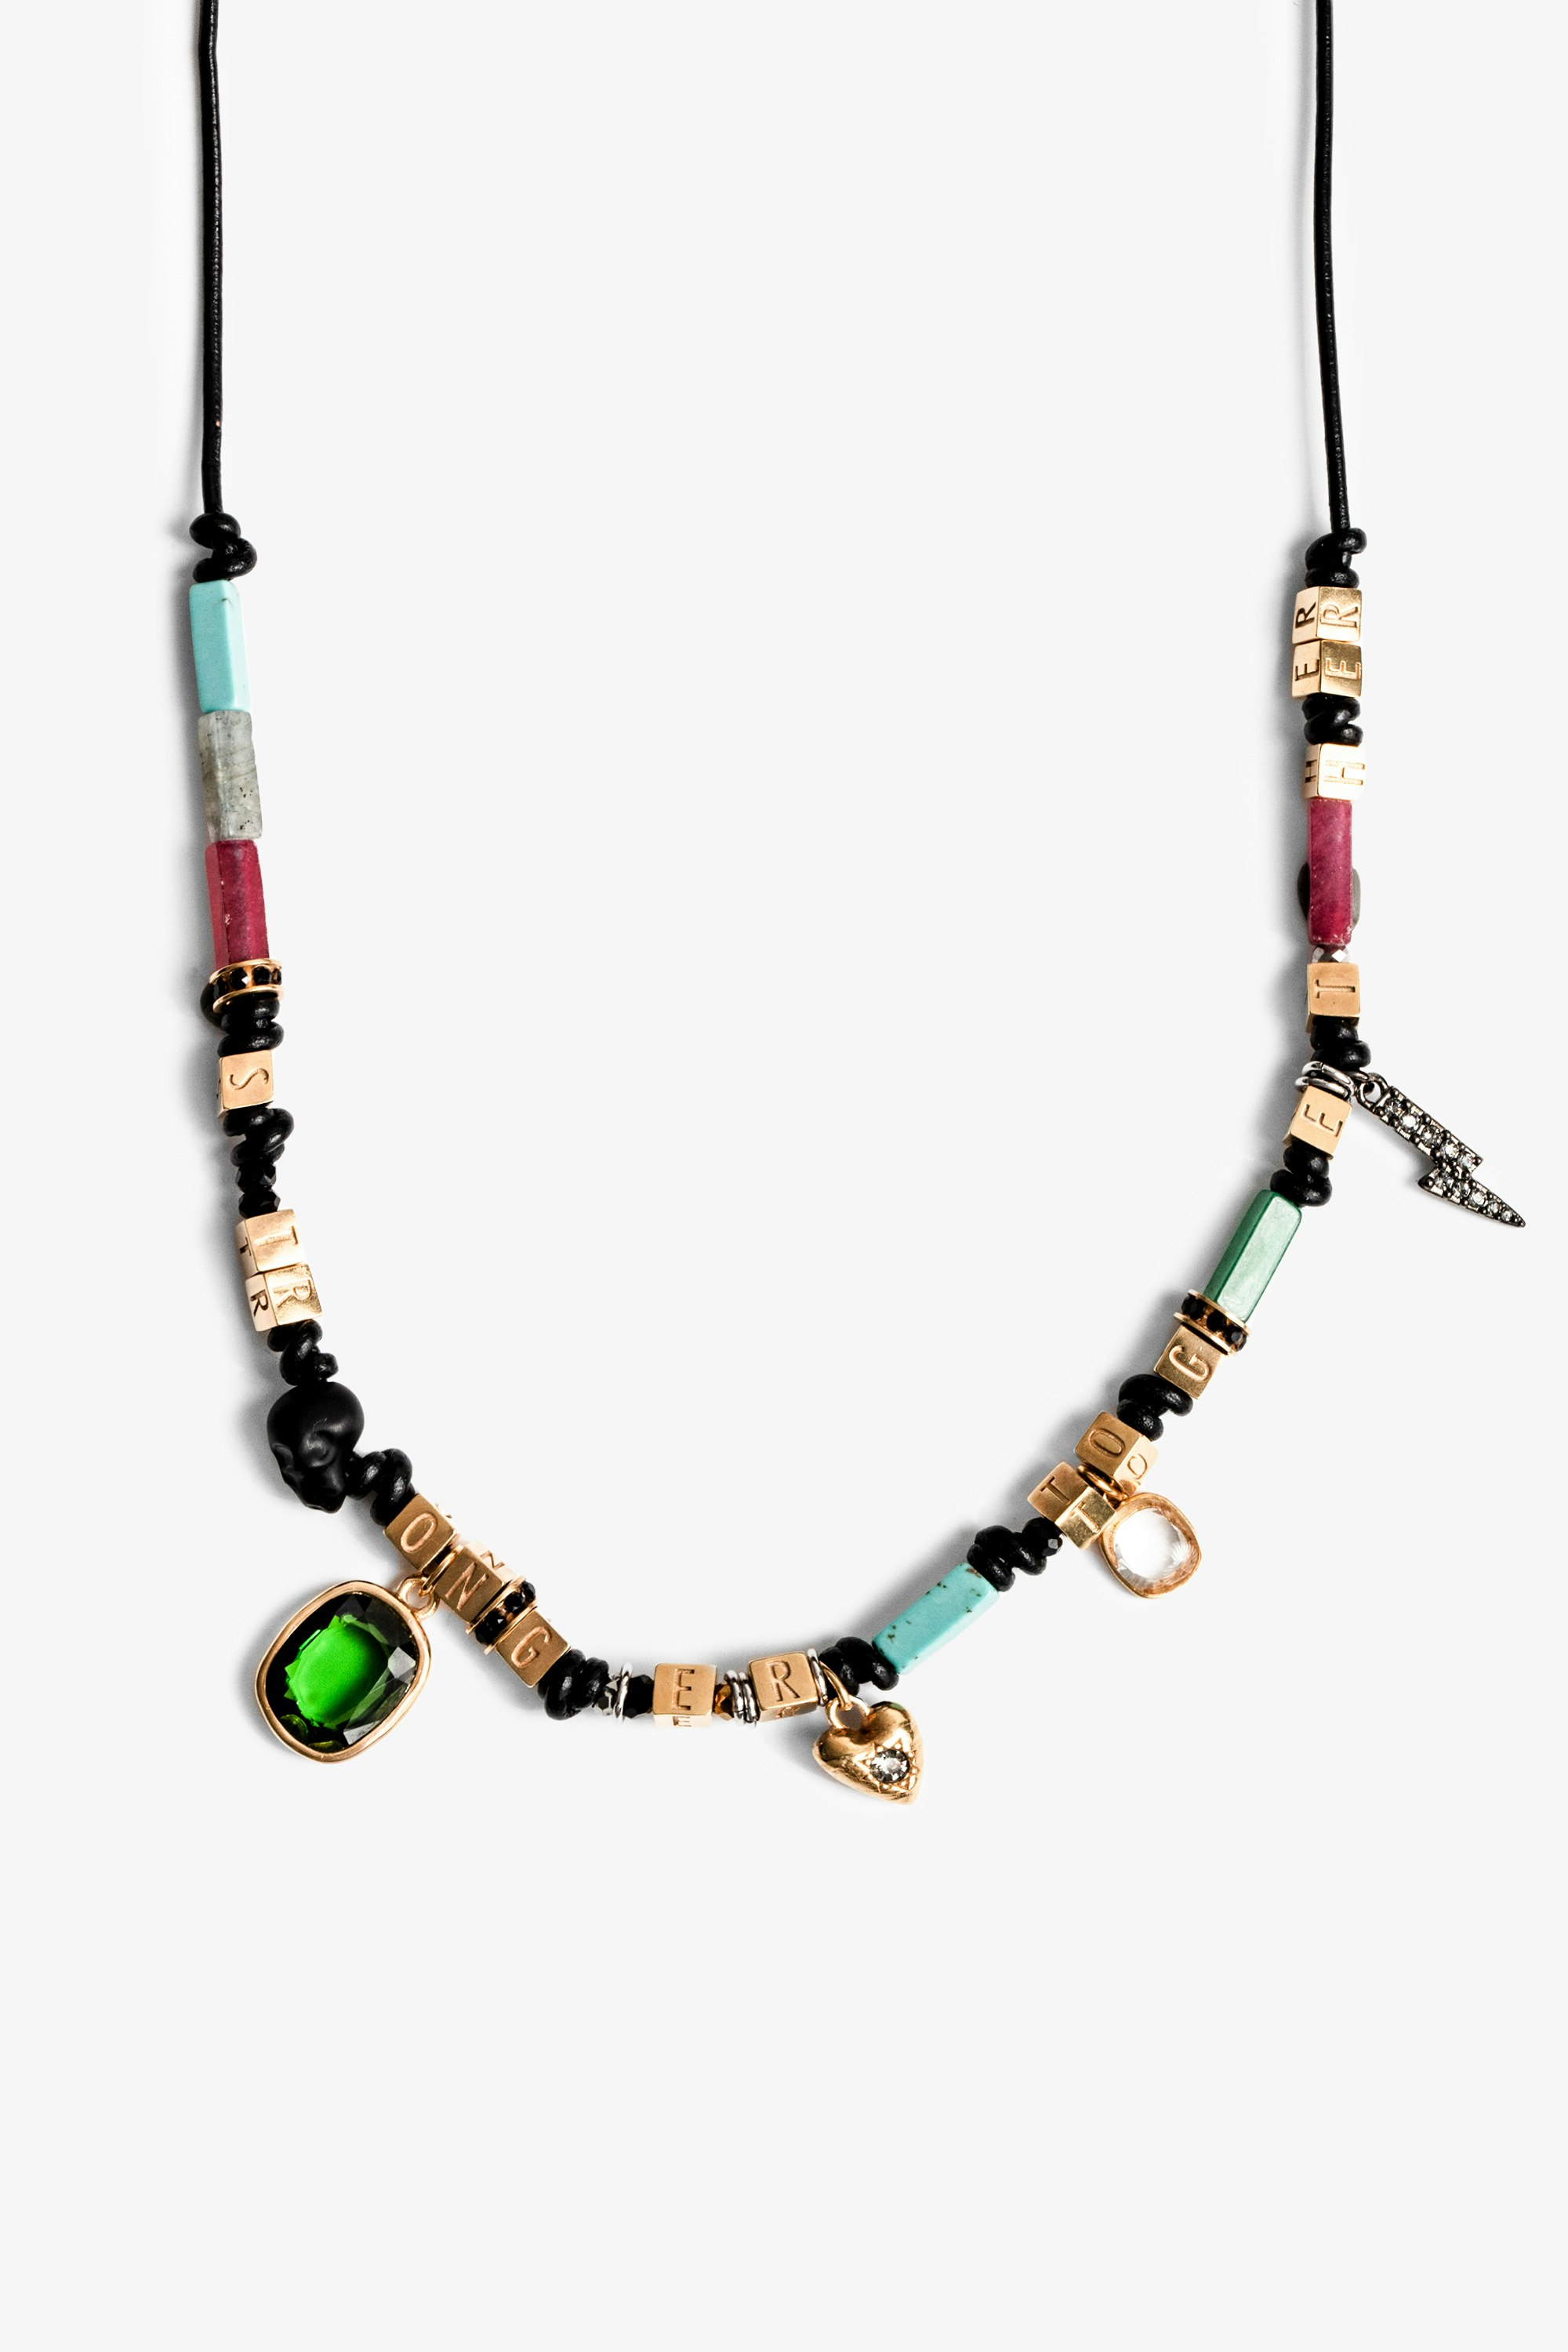 Mix n Match Full Charms Necklace Women’s cord necklace with metal charms and stones.